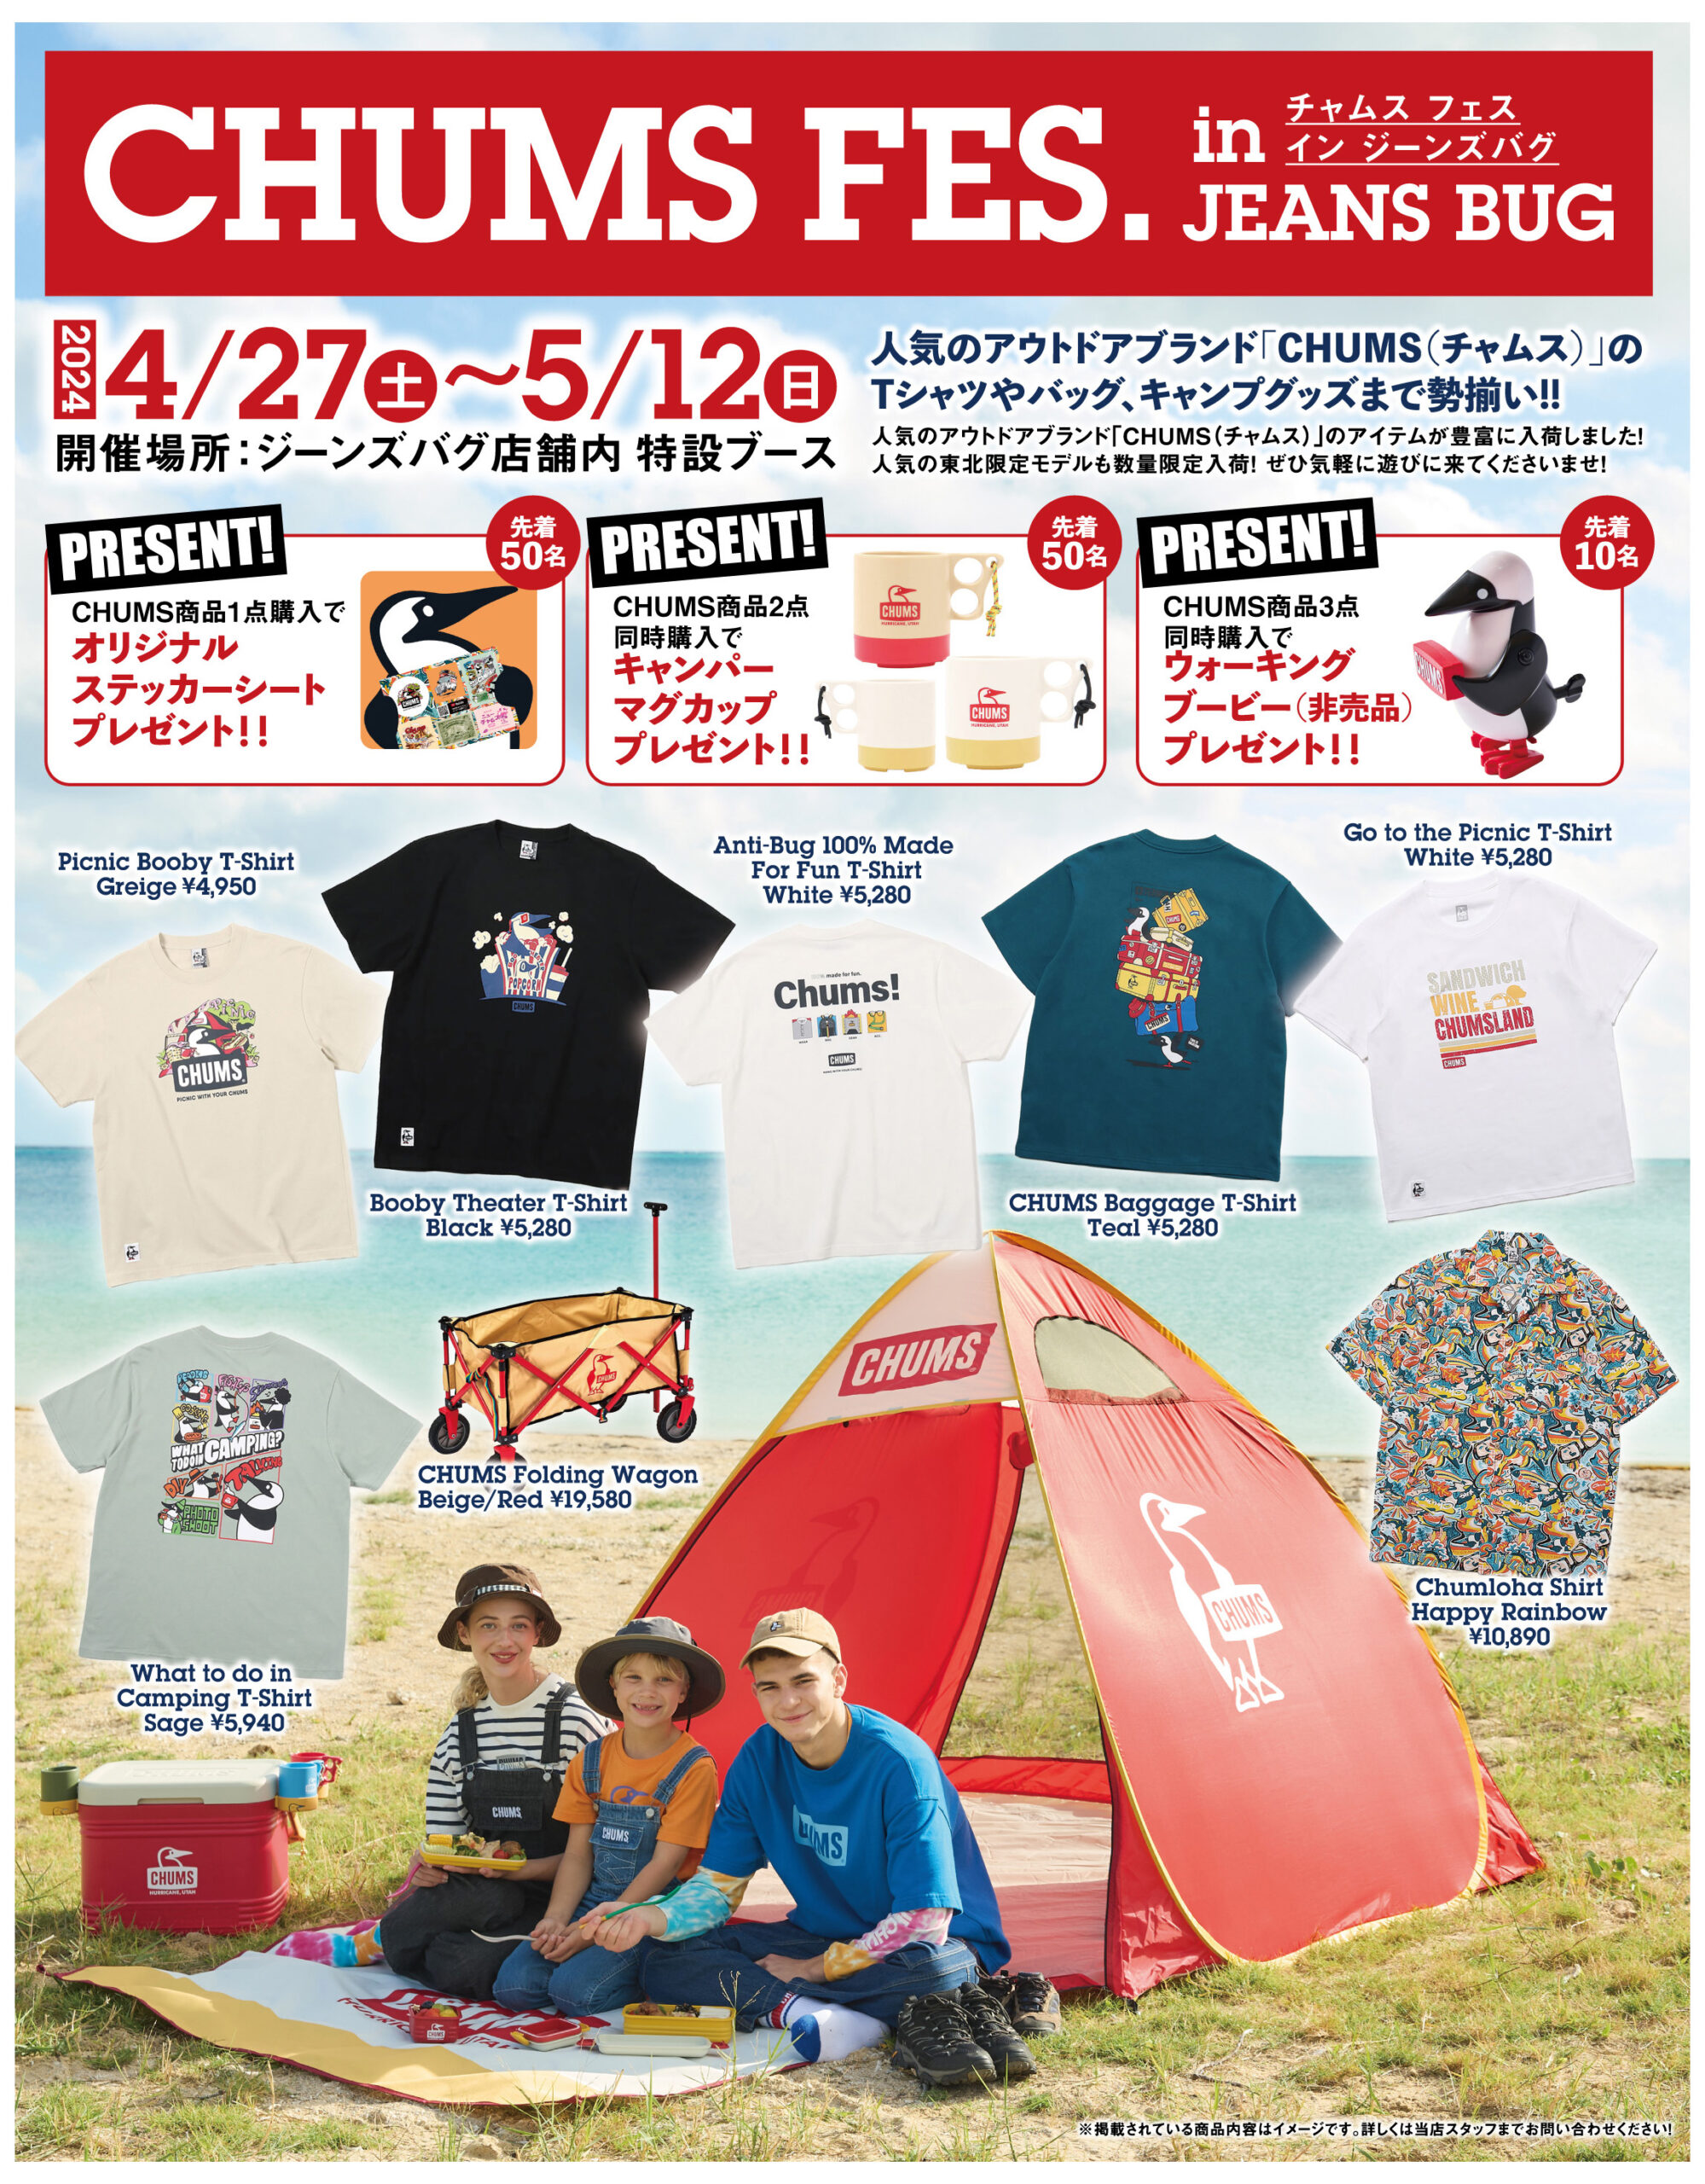 CHUMS FES.（チャムス フェス） in ROBIN JEANS BUG 4/27～5/12まで